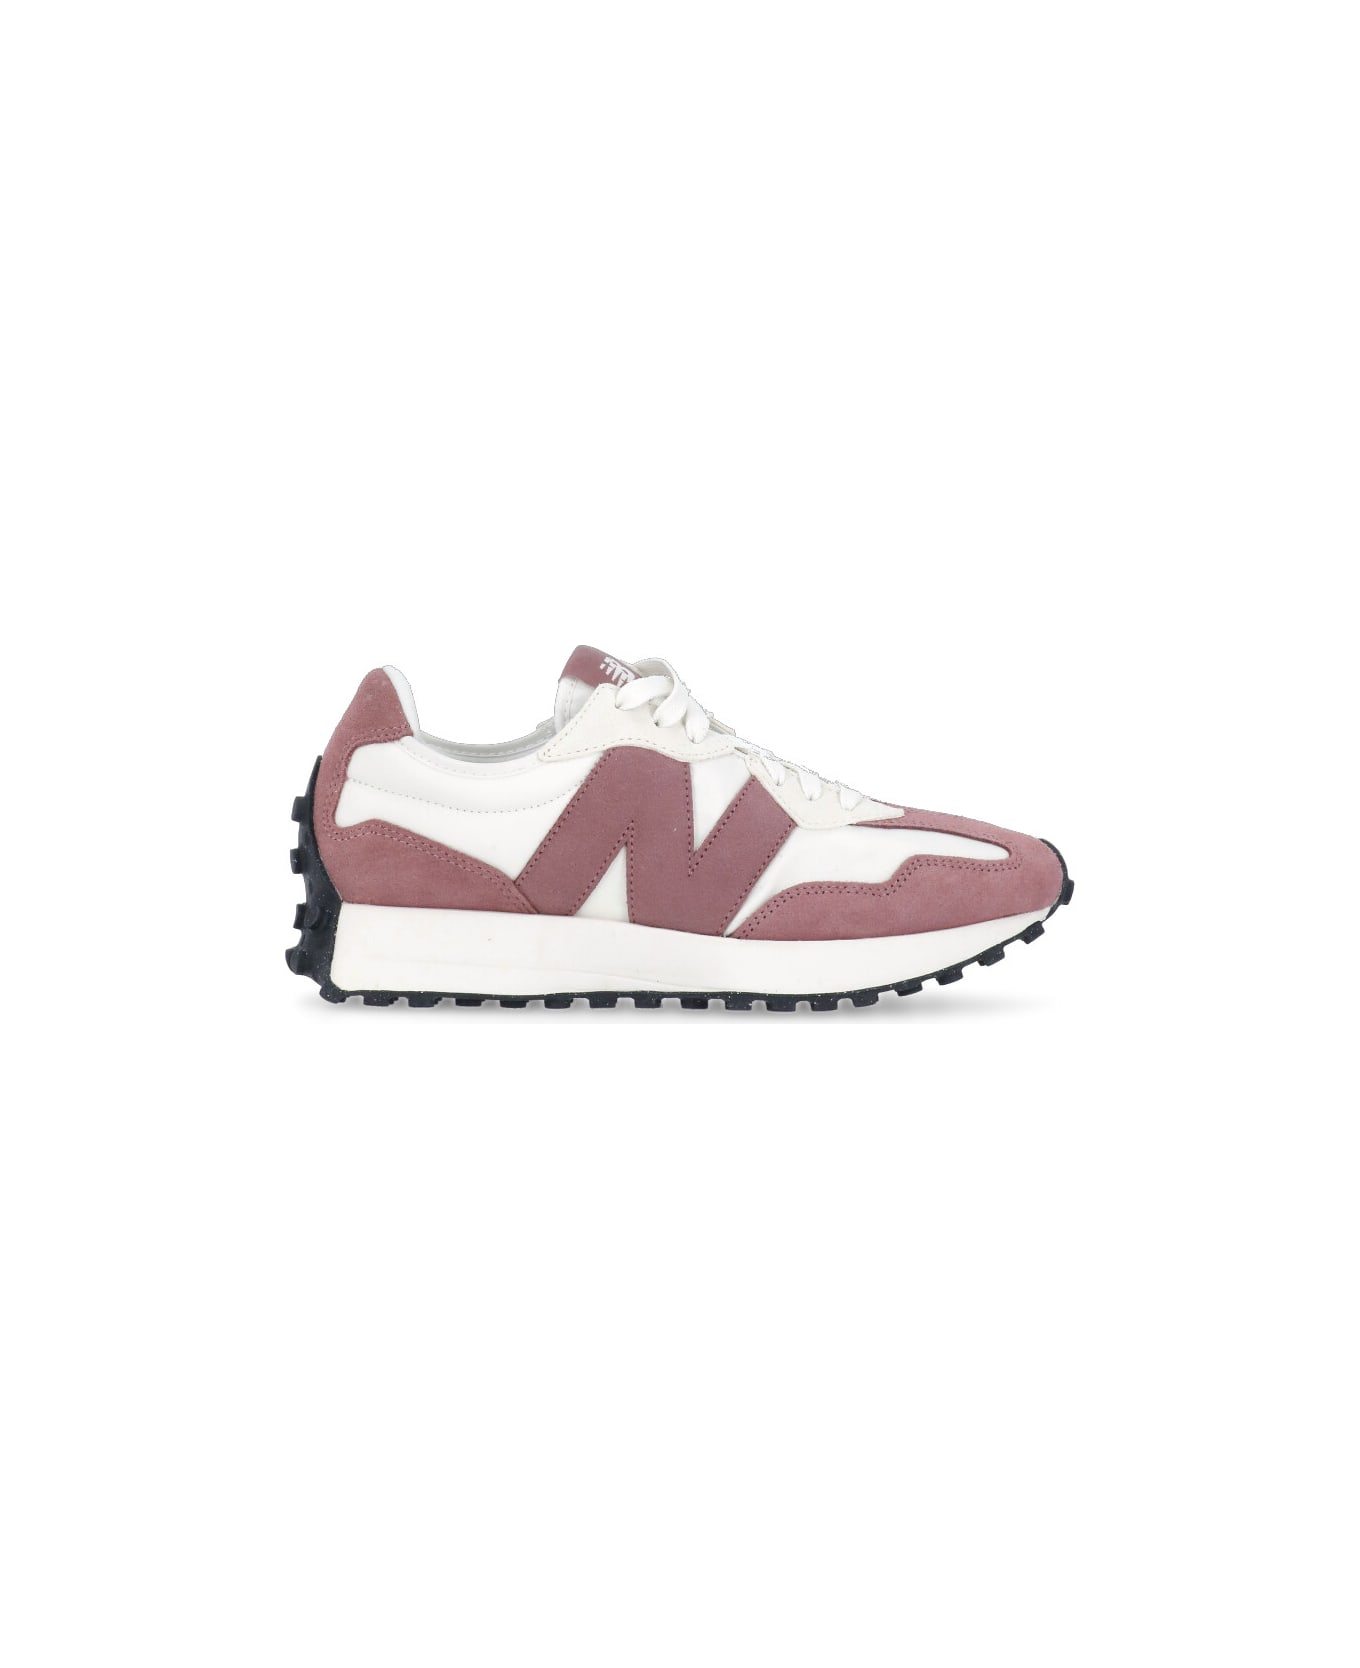 New Balance 327 Sneakers - Pink スニーカー